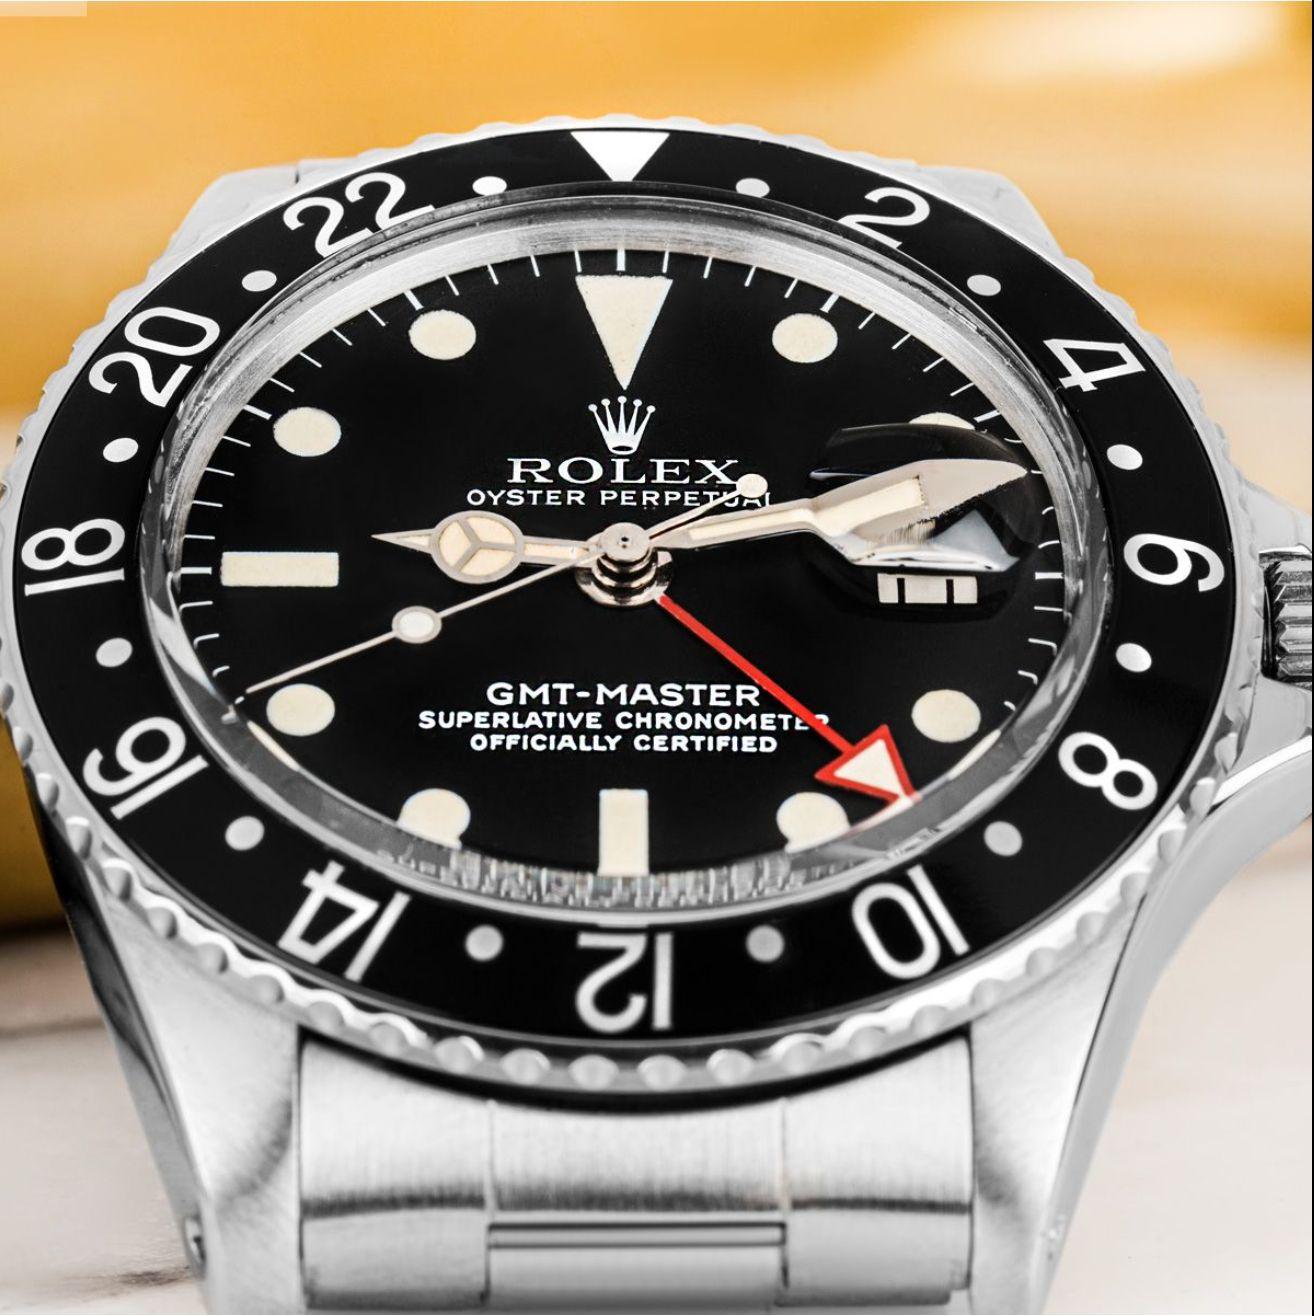 A vintage stainless steel GMT-Master by Rolex. Featuring a matte black dial with applied hour markers, a date aperture and a stainless steel bi-directional rotating bezel with a black bezel insert.

Fitted with a plastic glass, a self-winding